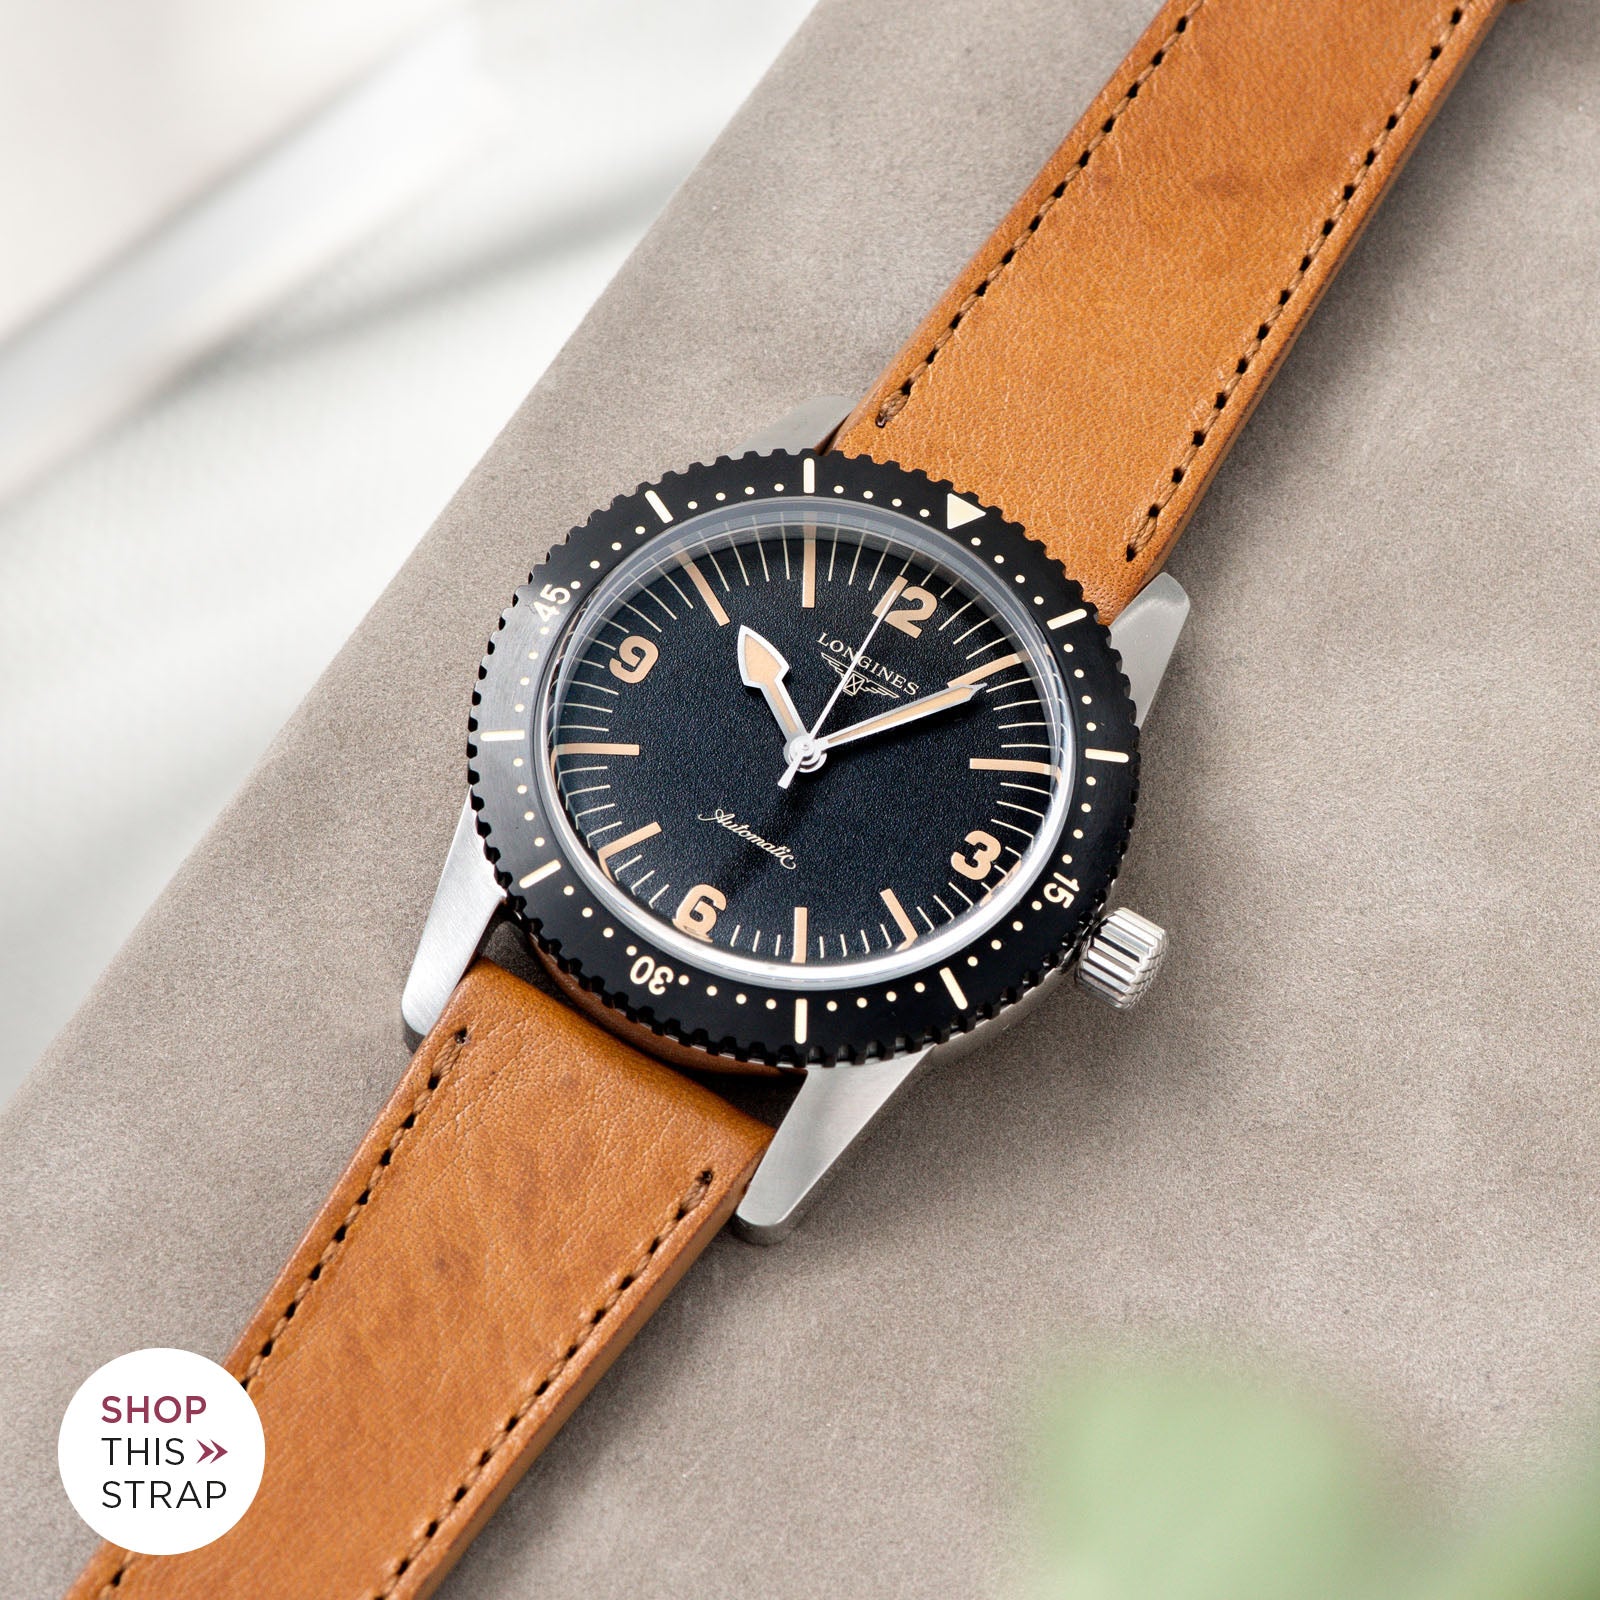 Bulang and Sons_Strap Guide_Longines Skin Diver_Gilt Brown tonal Leather Watch-Strap